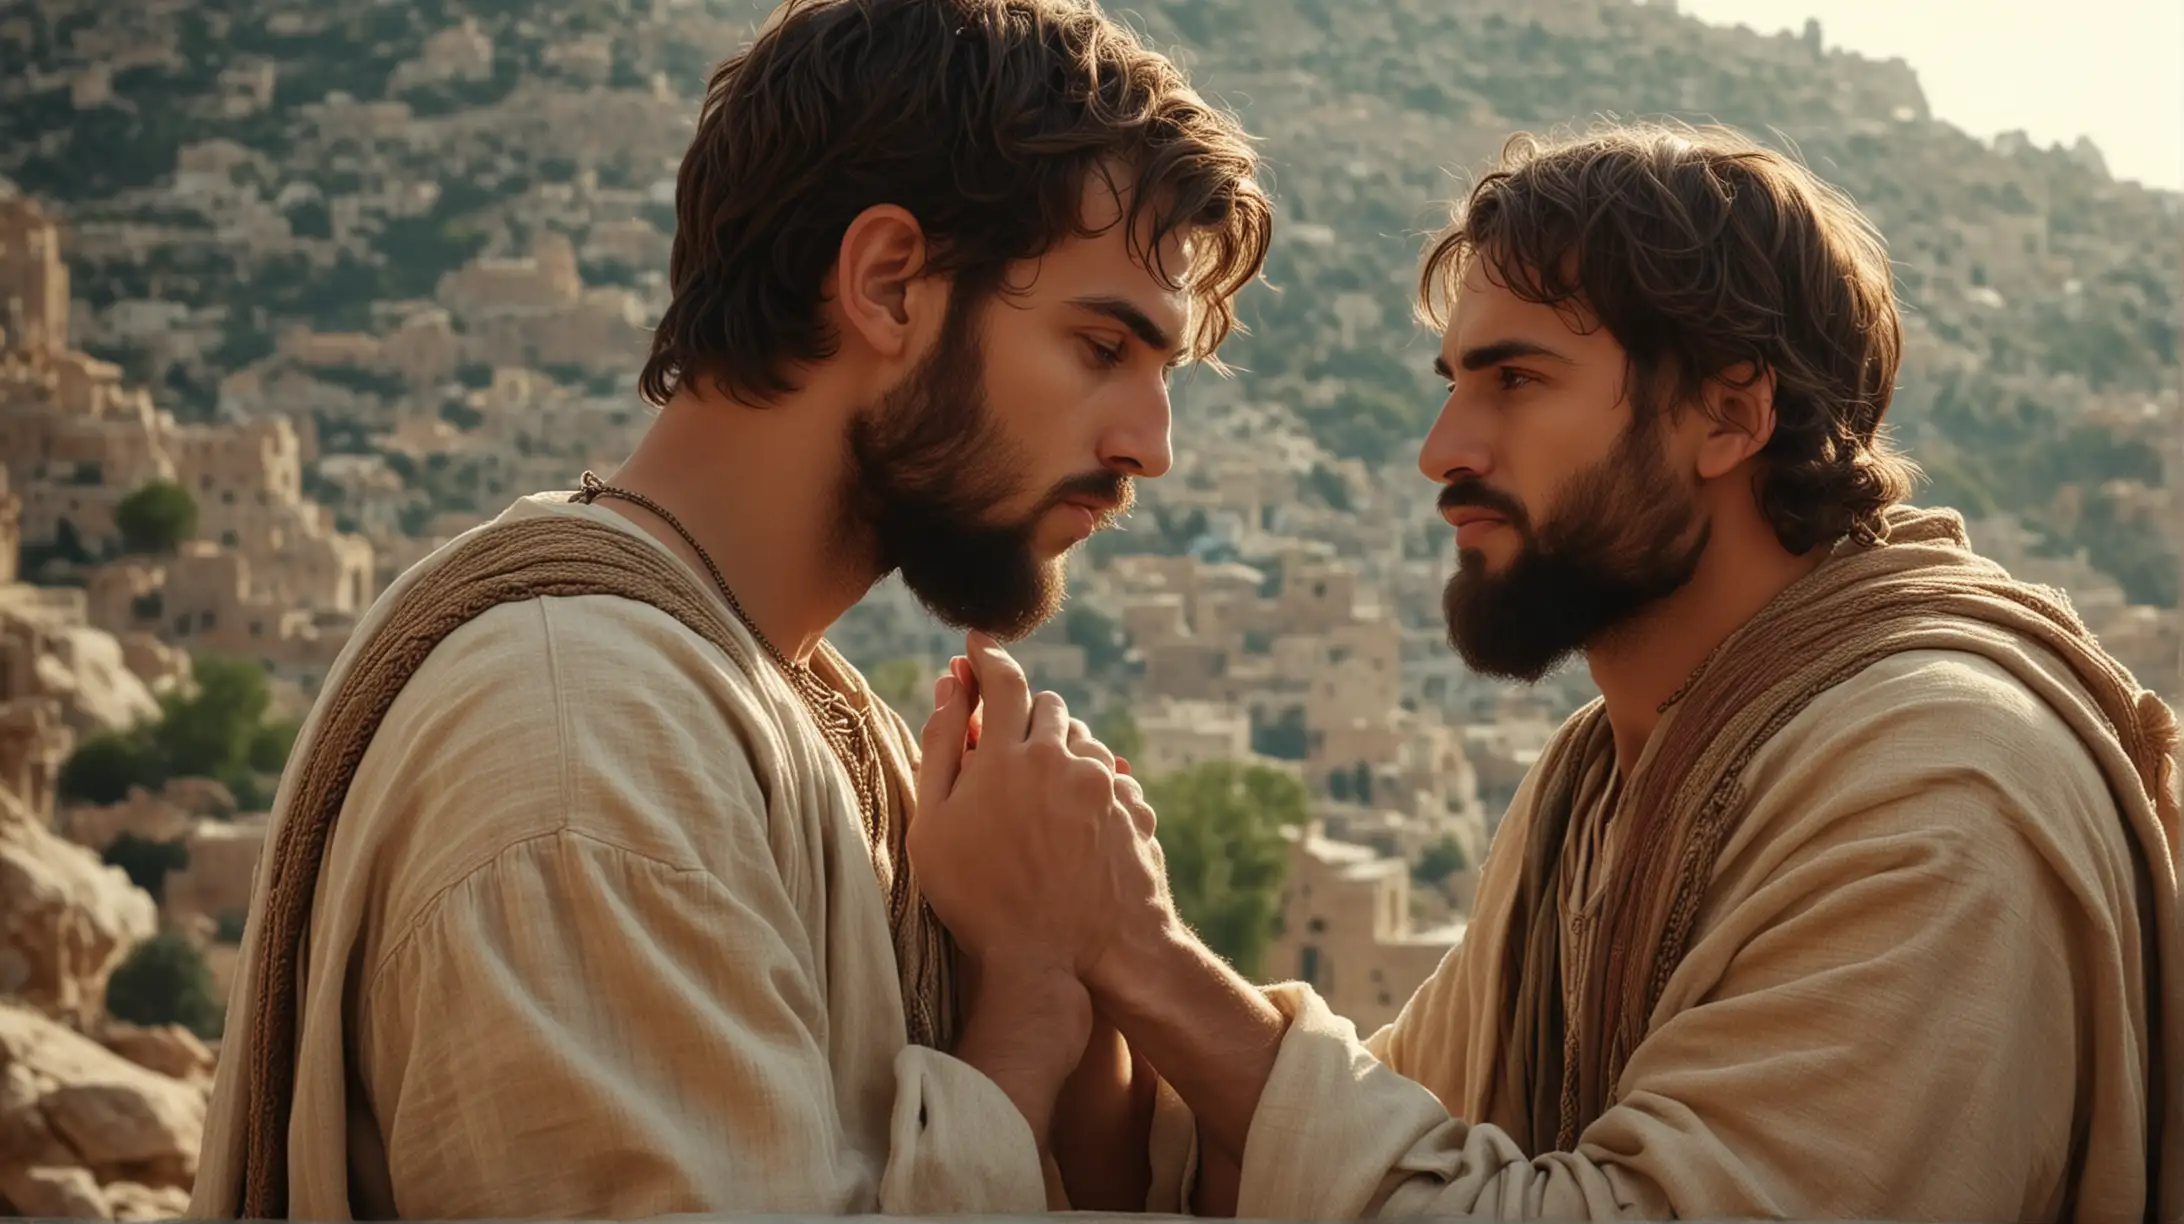 young apostle Paul and Christ in love both about 24 years old, bible history, biblical Jerusalem landscape vivid uhd 8k very atmospheric Cannon professional photography apostle fashion model showing affection to each other extremely photorealistic high detailed sharp focus intricate romantic cinematic